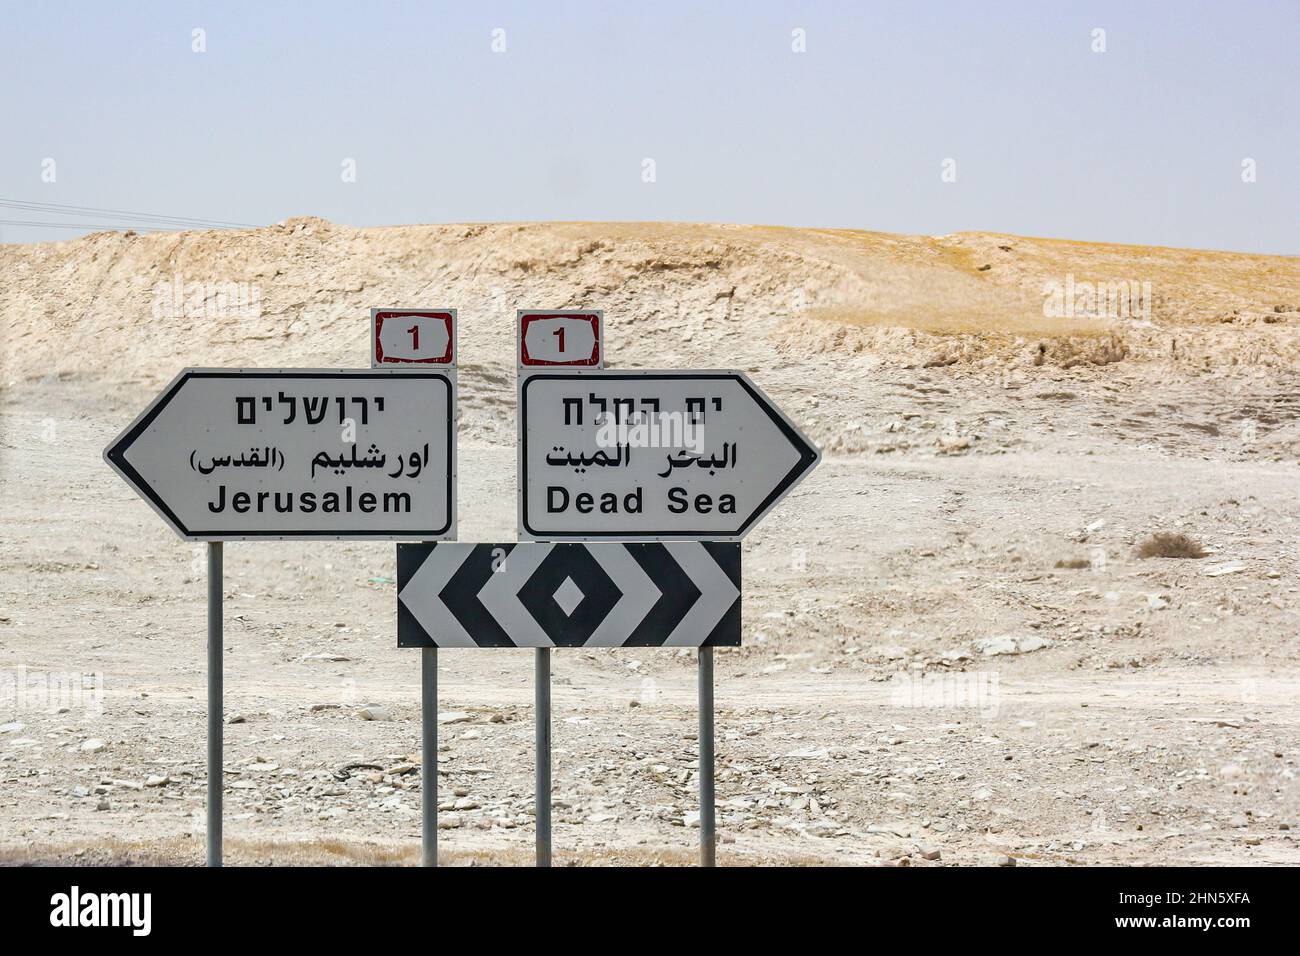 Trilingual road signs printed in Hebrew, Arabic and English along Highway 1 in the Judean Desert direct travelers to Jerusalem and the Dead Sea. Stock Photo